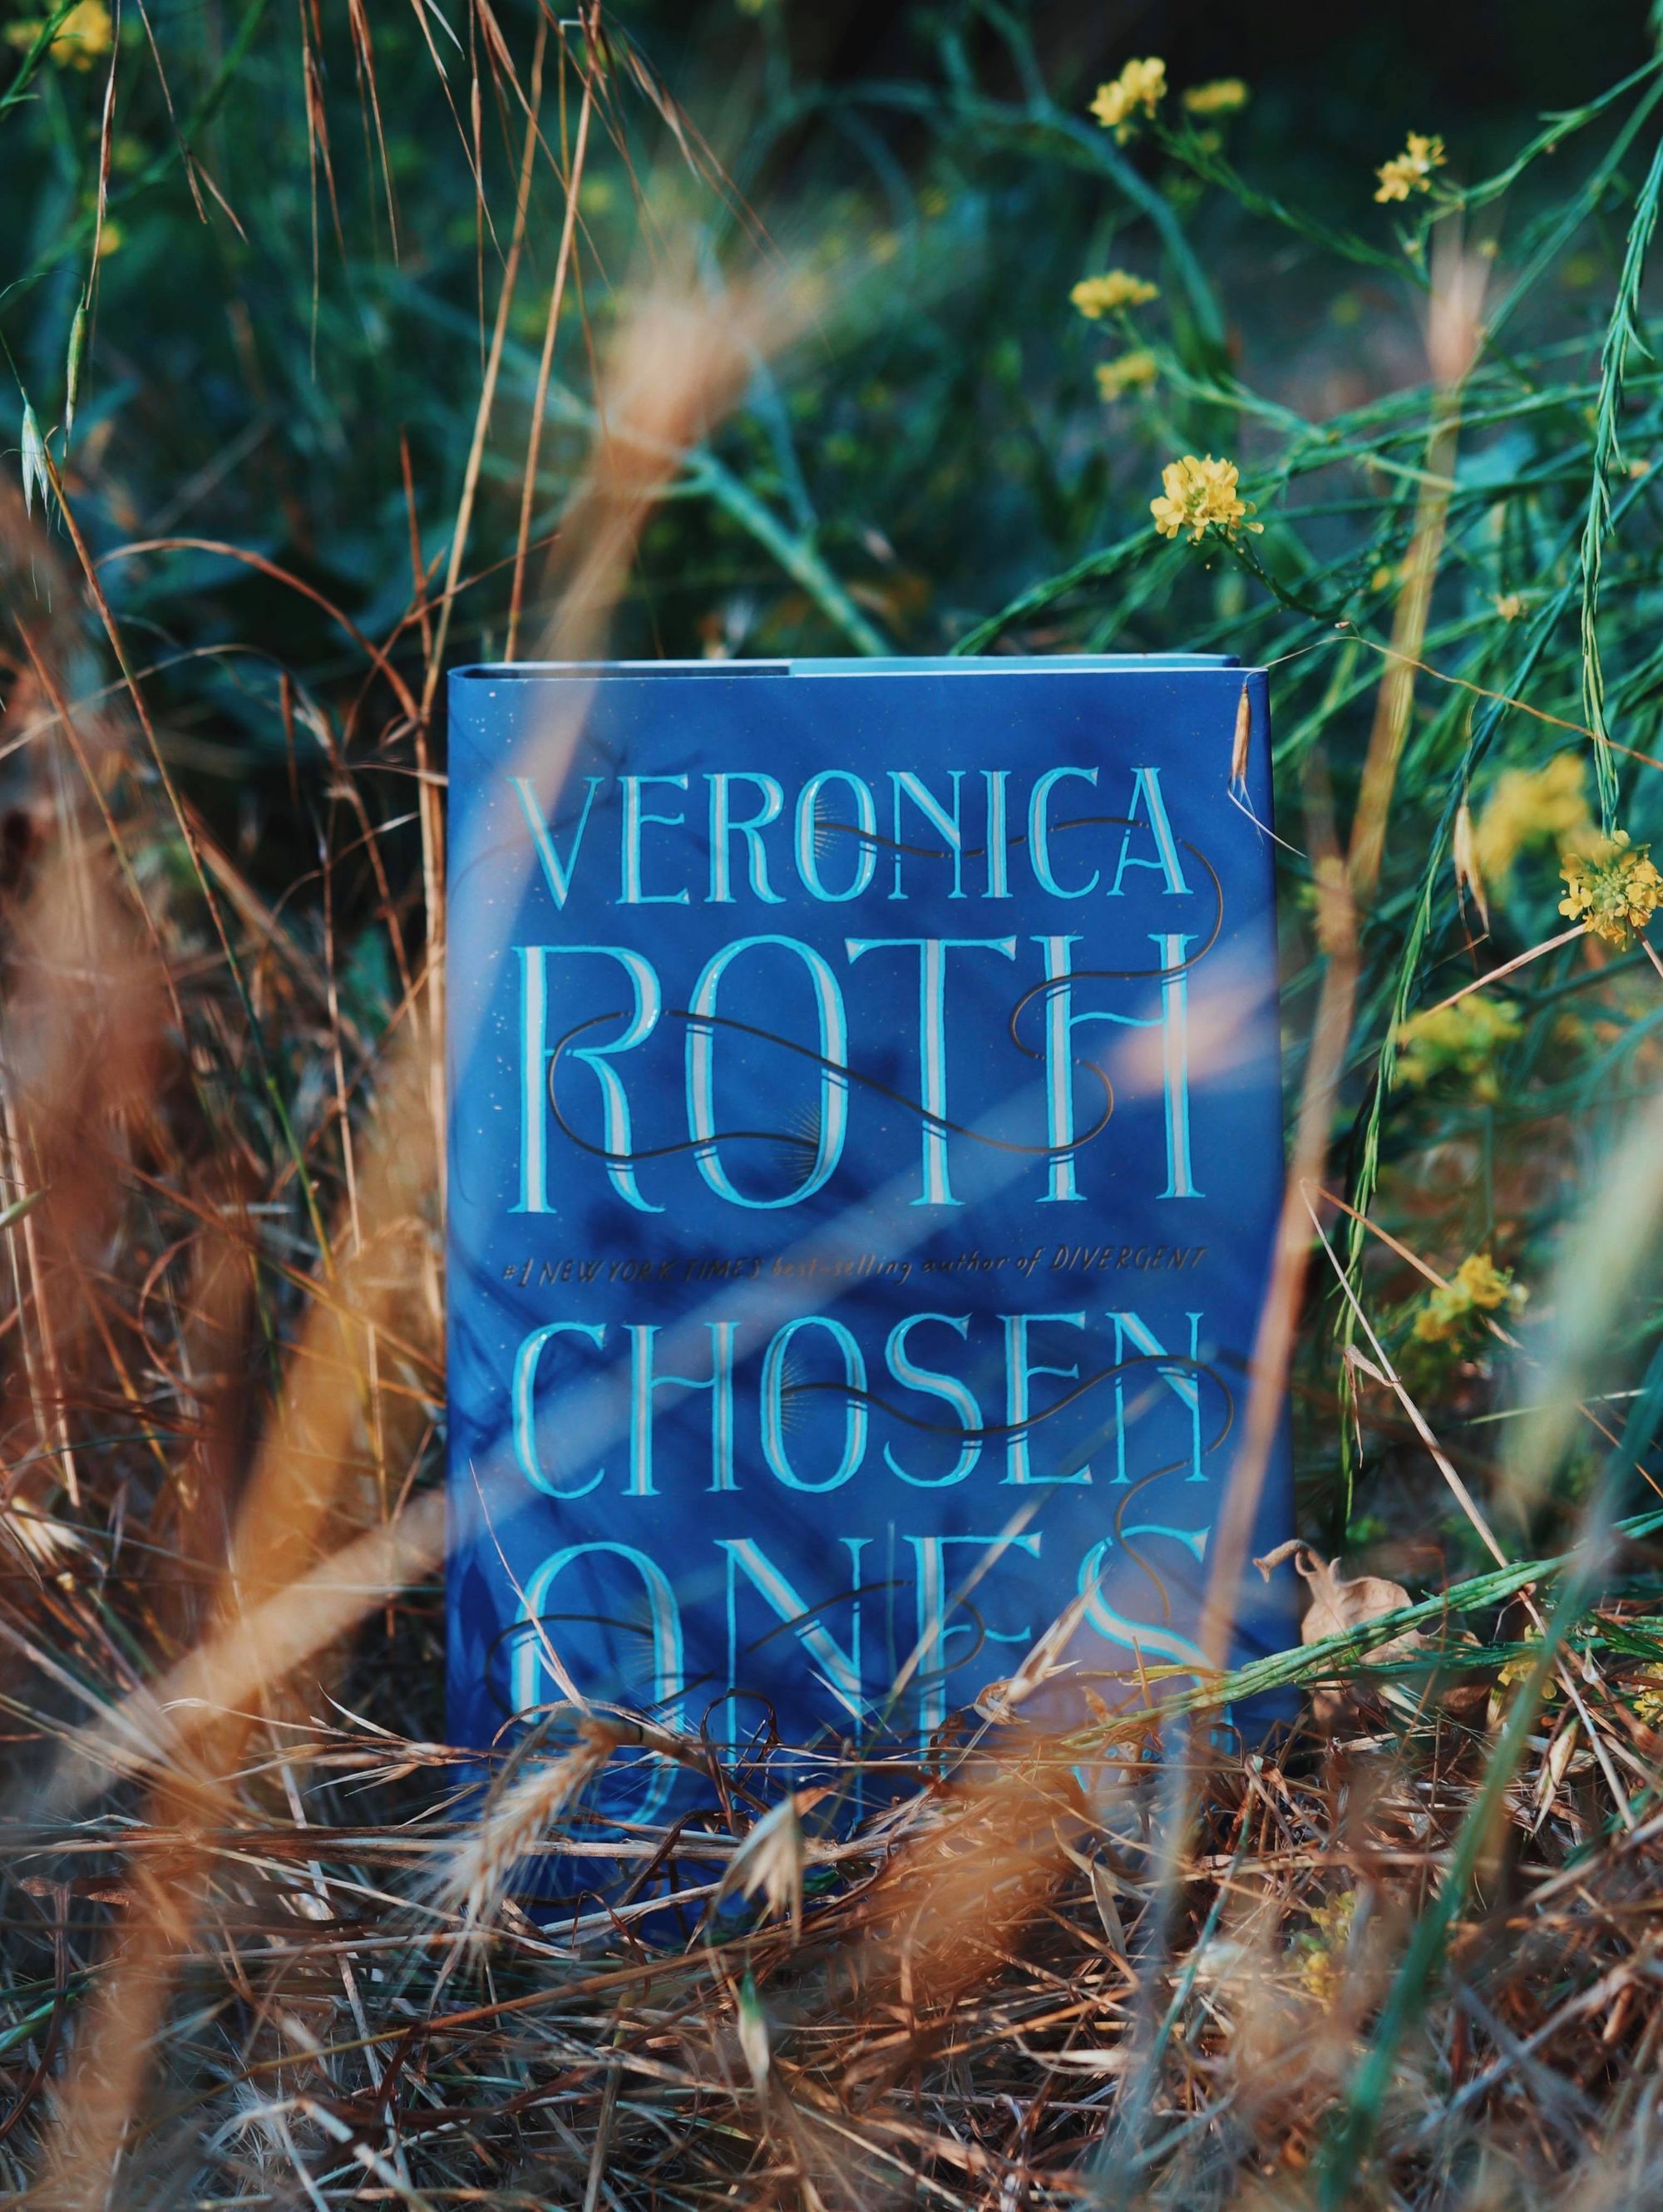 Chosen Ones: The new novel from NEW YORK TIMES best-selling author Veronica  Roth